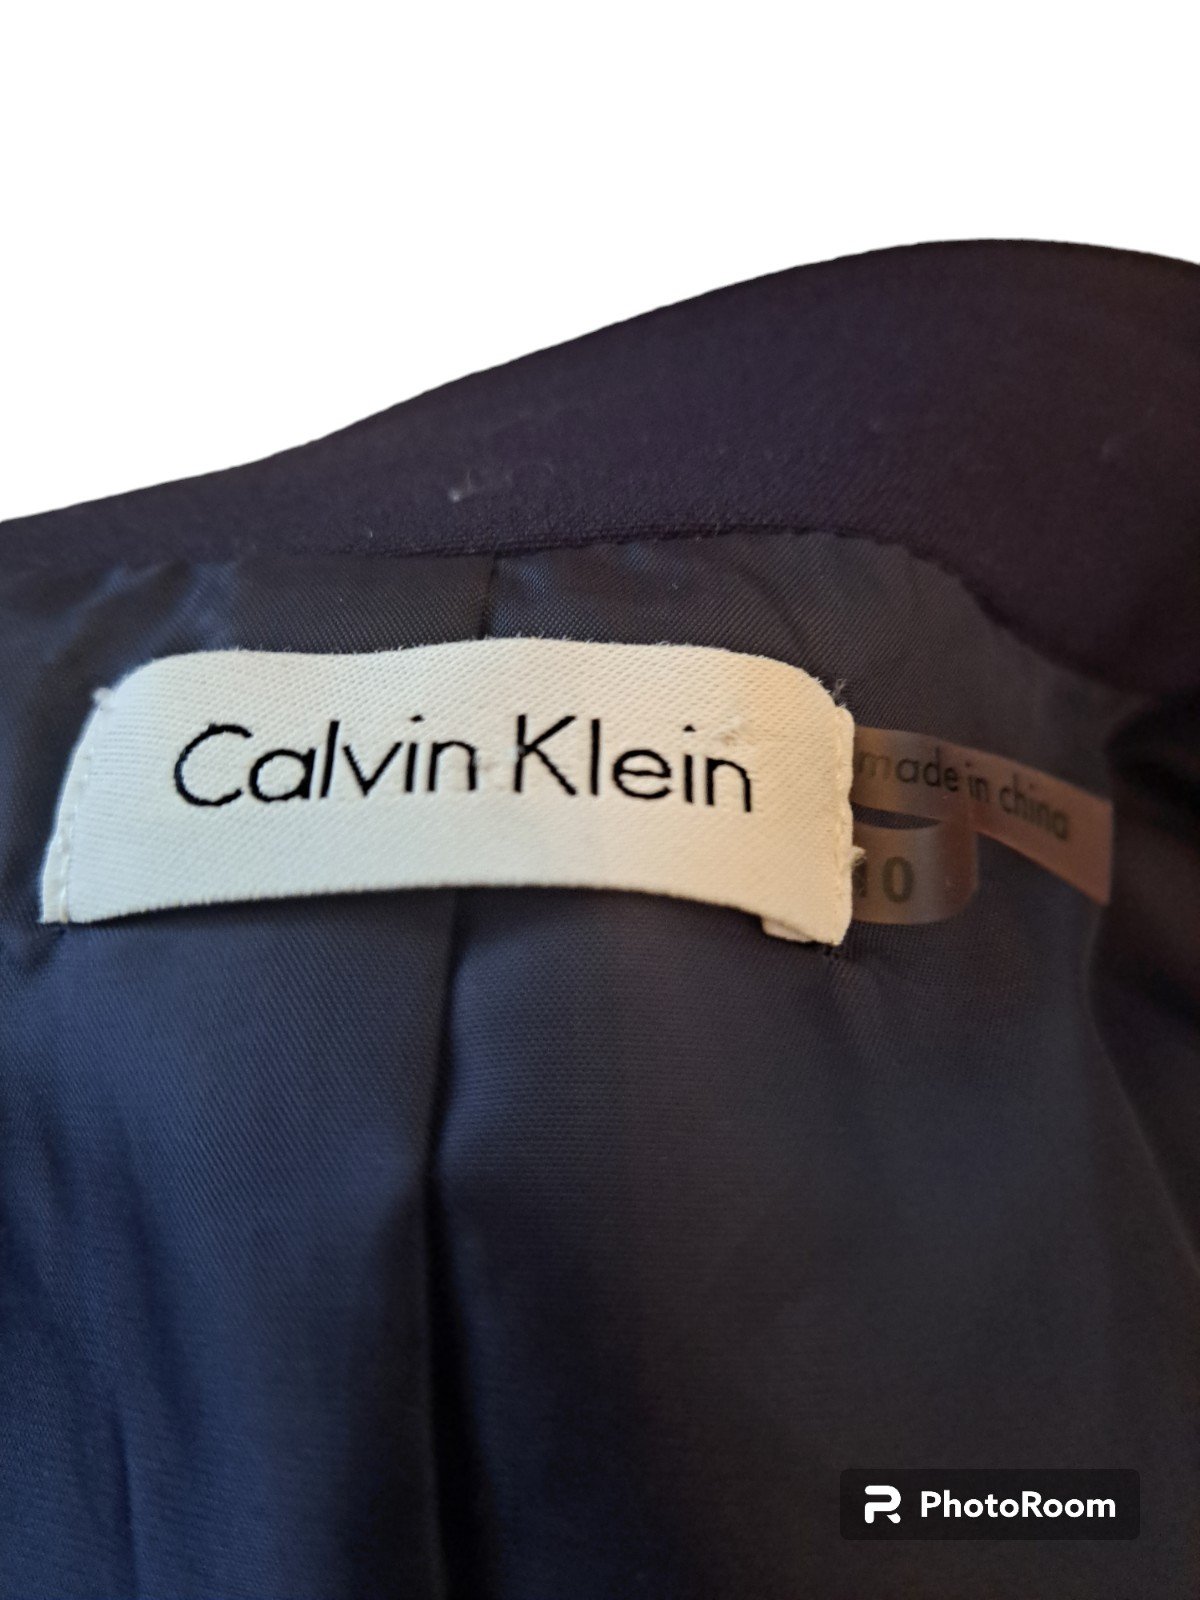 Calvin Klein 10 navy business career dress belted lined navy 68Ify5voW